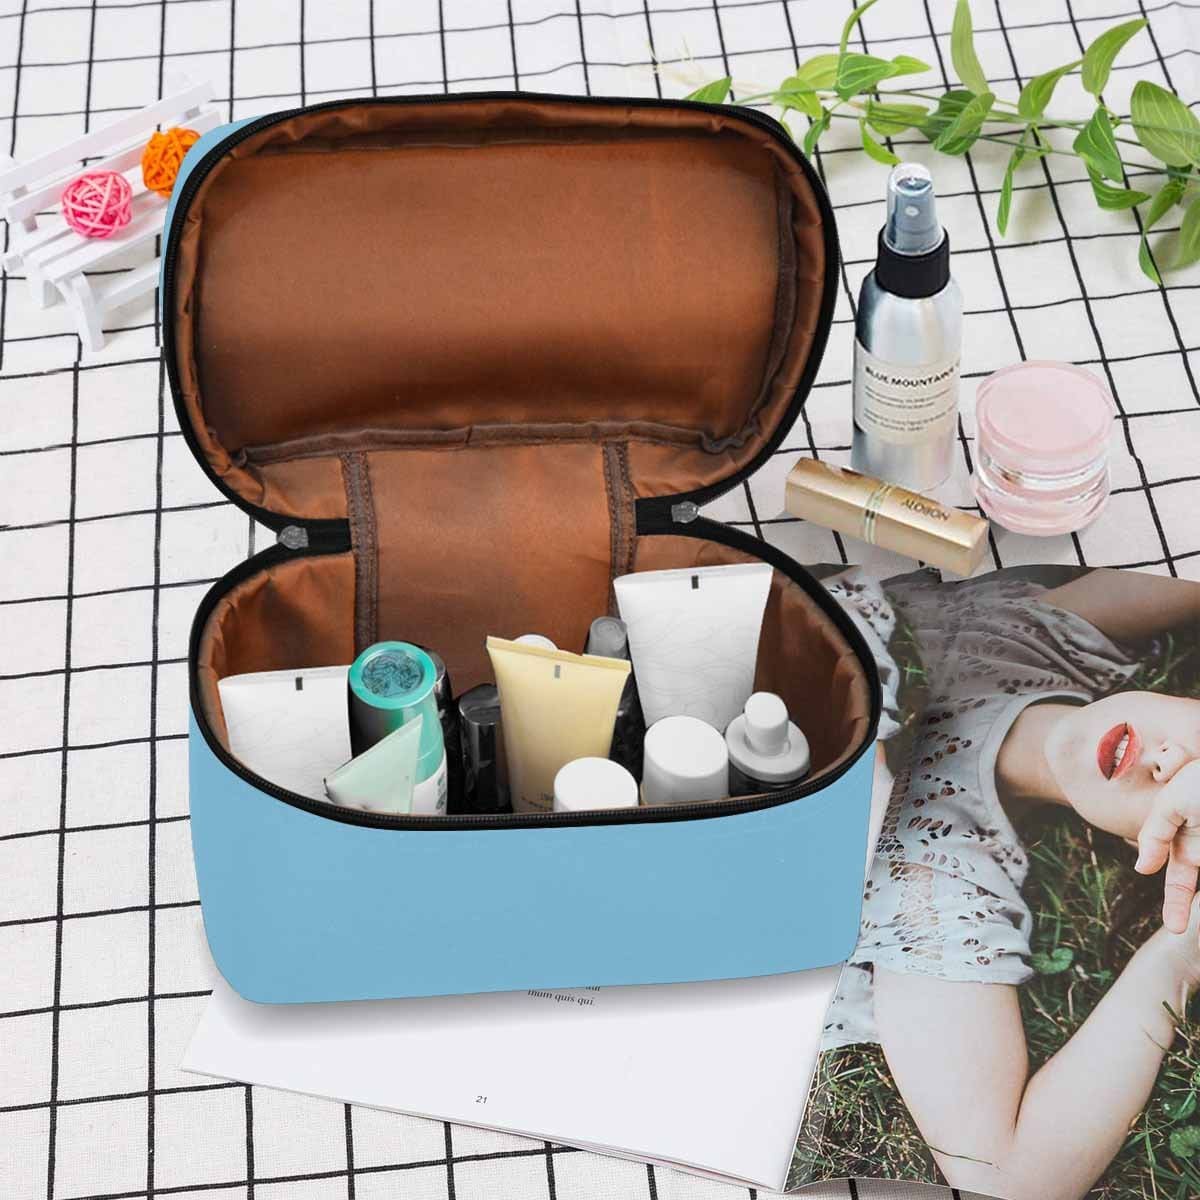 Cosmetic Bag Light Blue Travel Case - Bags | Cosmetic Bags